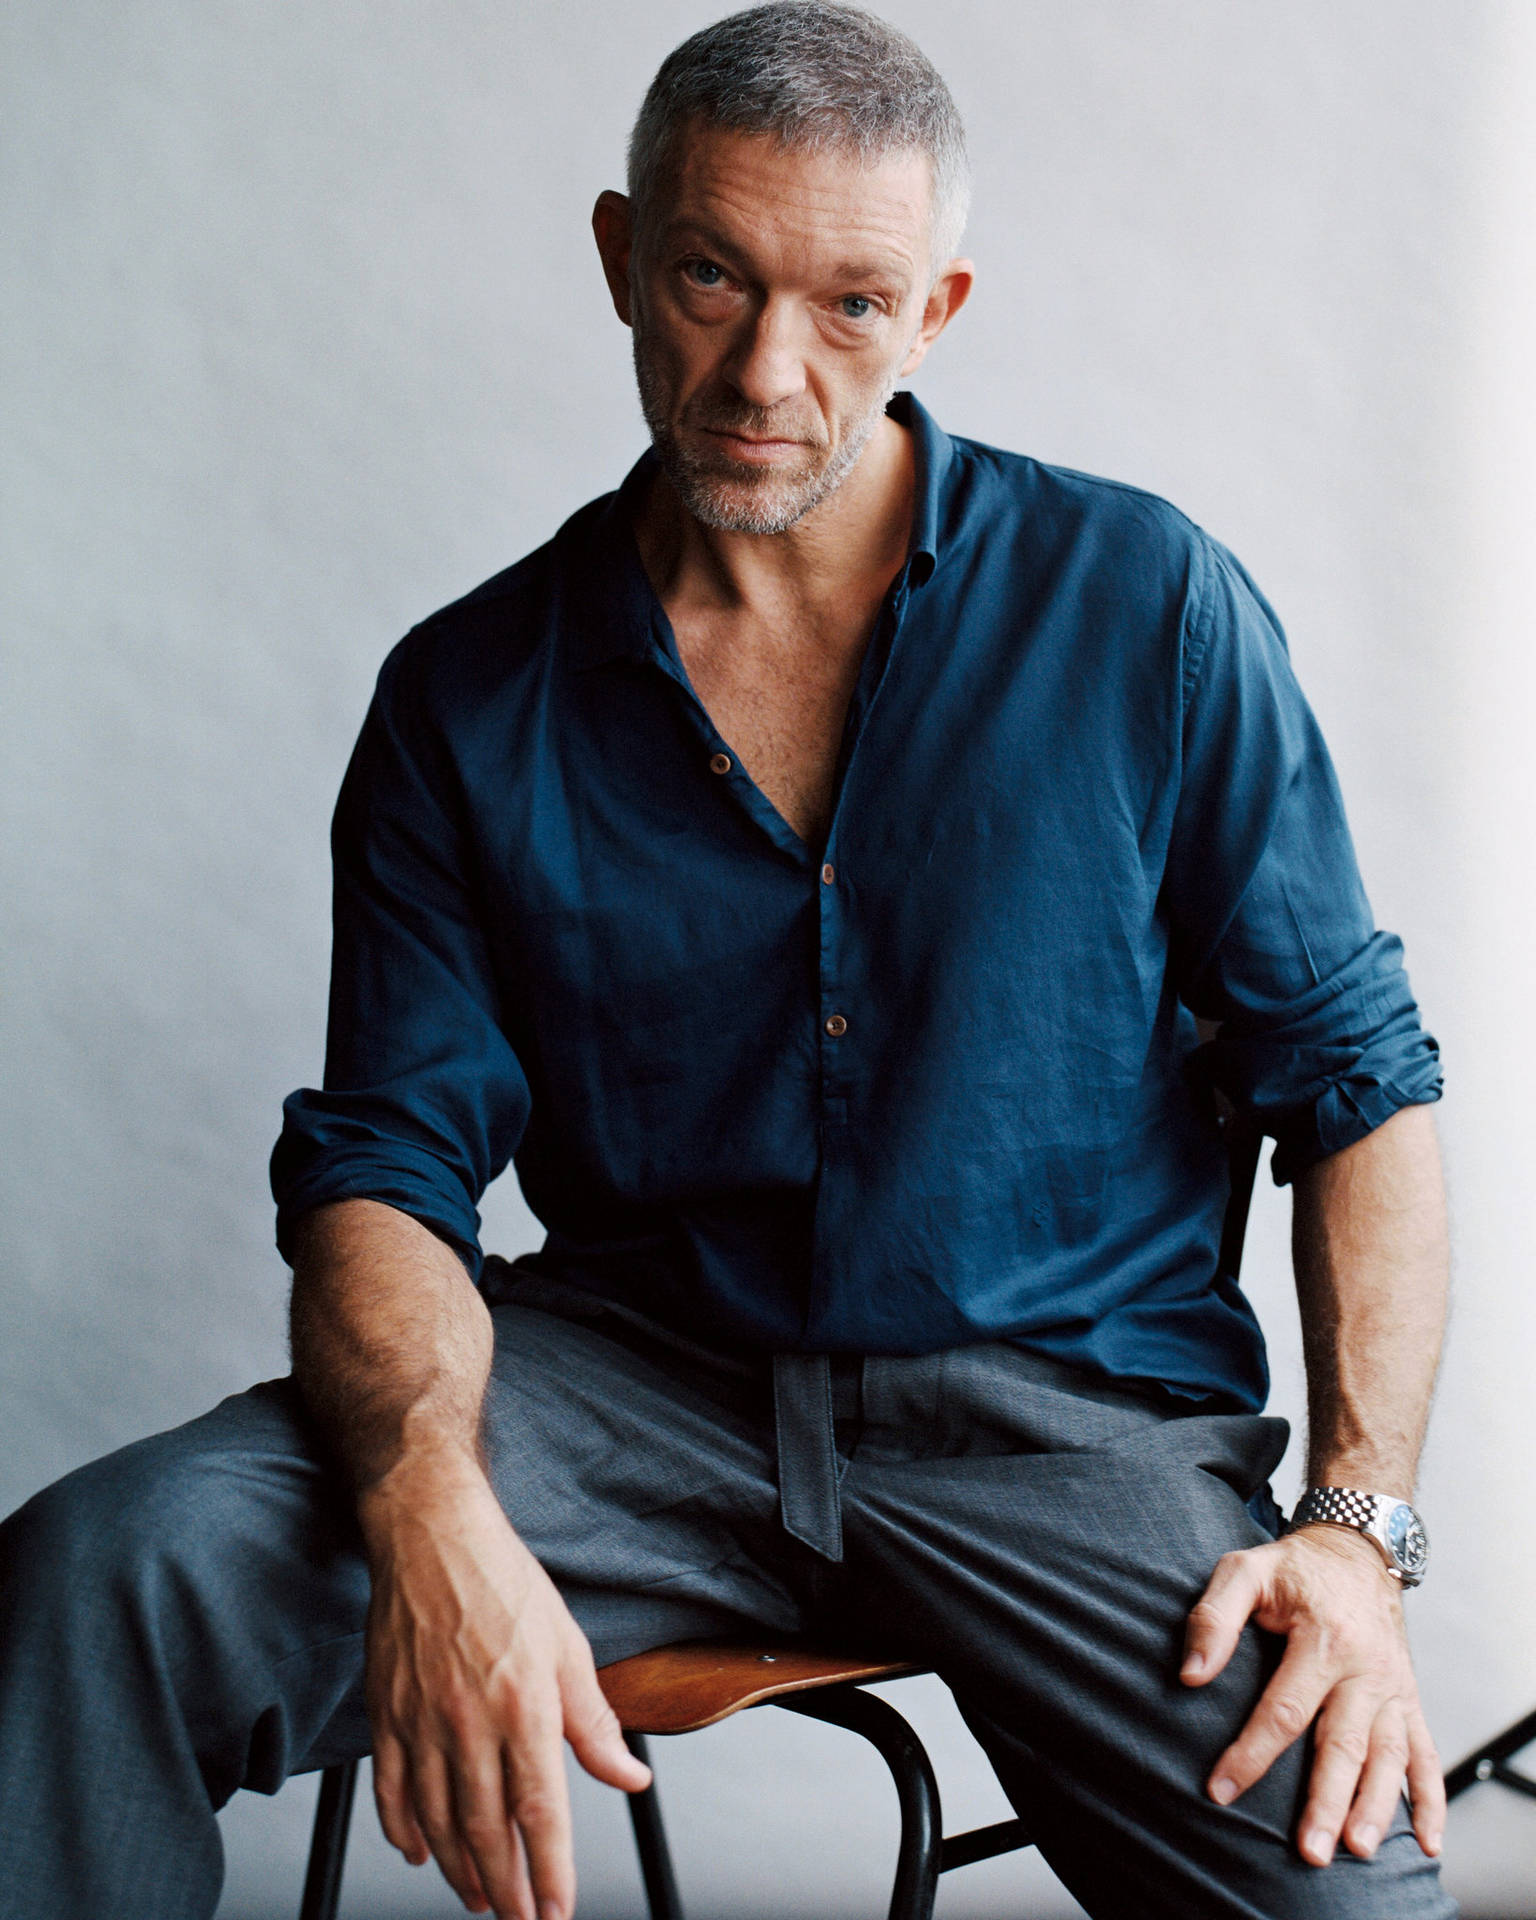 Renowned Actor Vincent Cassel Contemplatively Sitting on a Chair Wallpaper